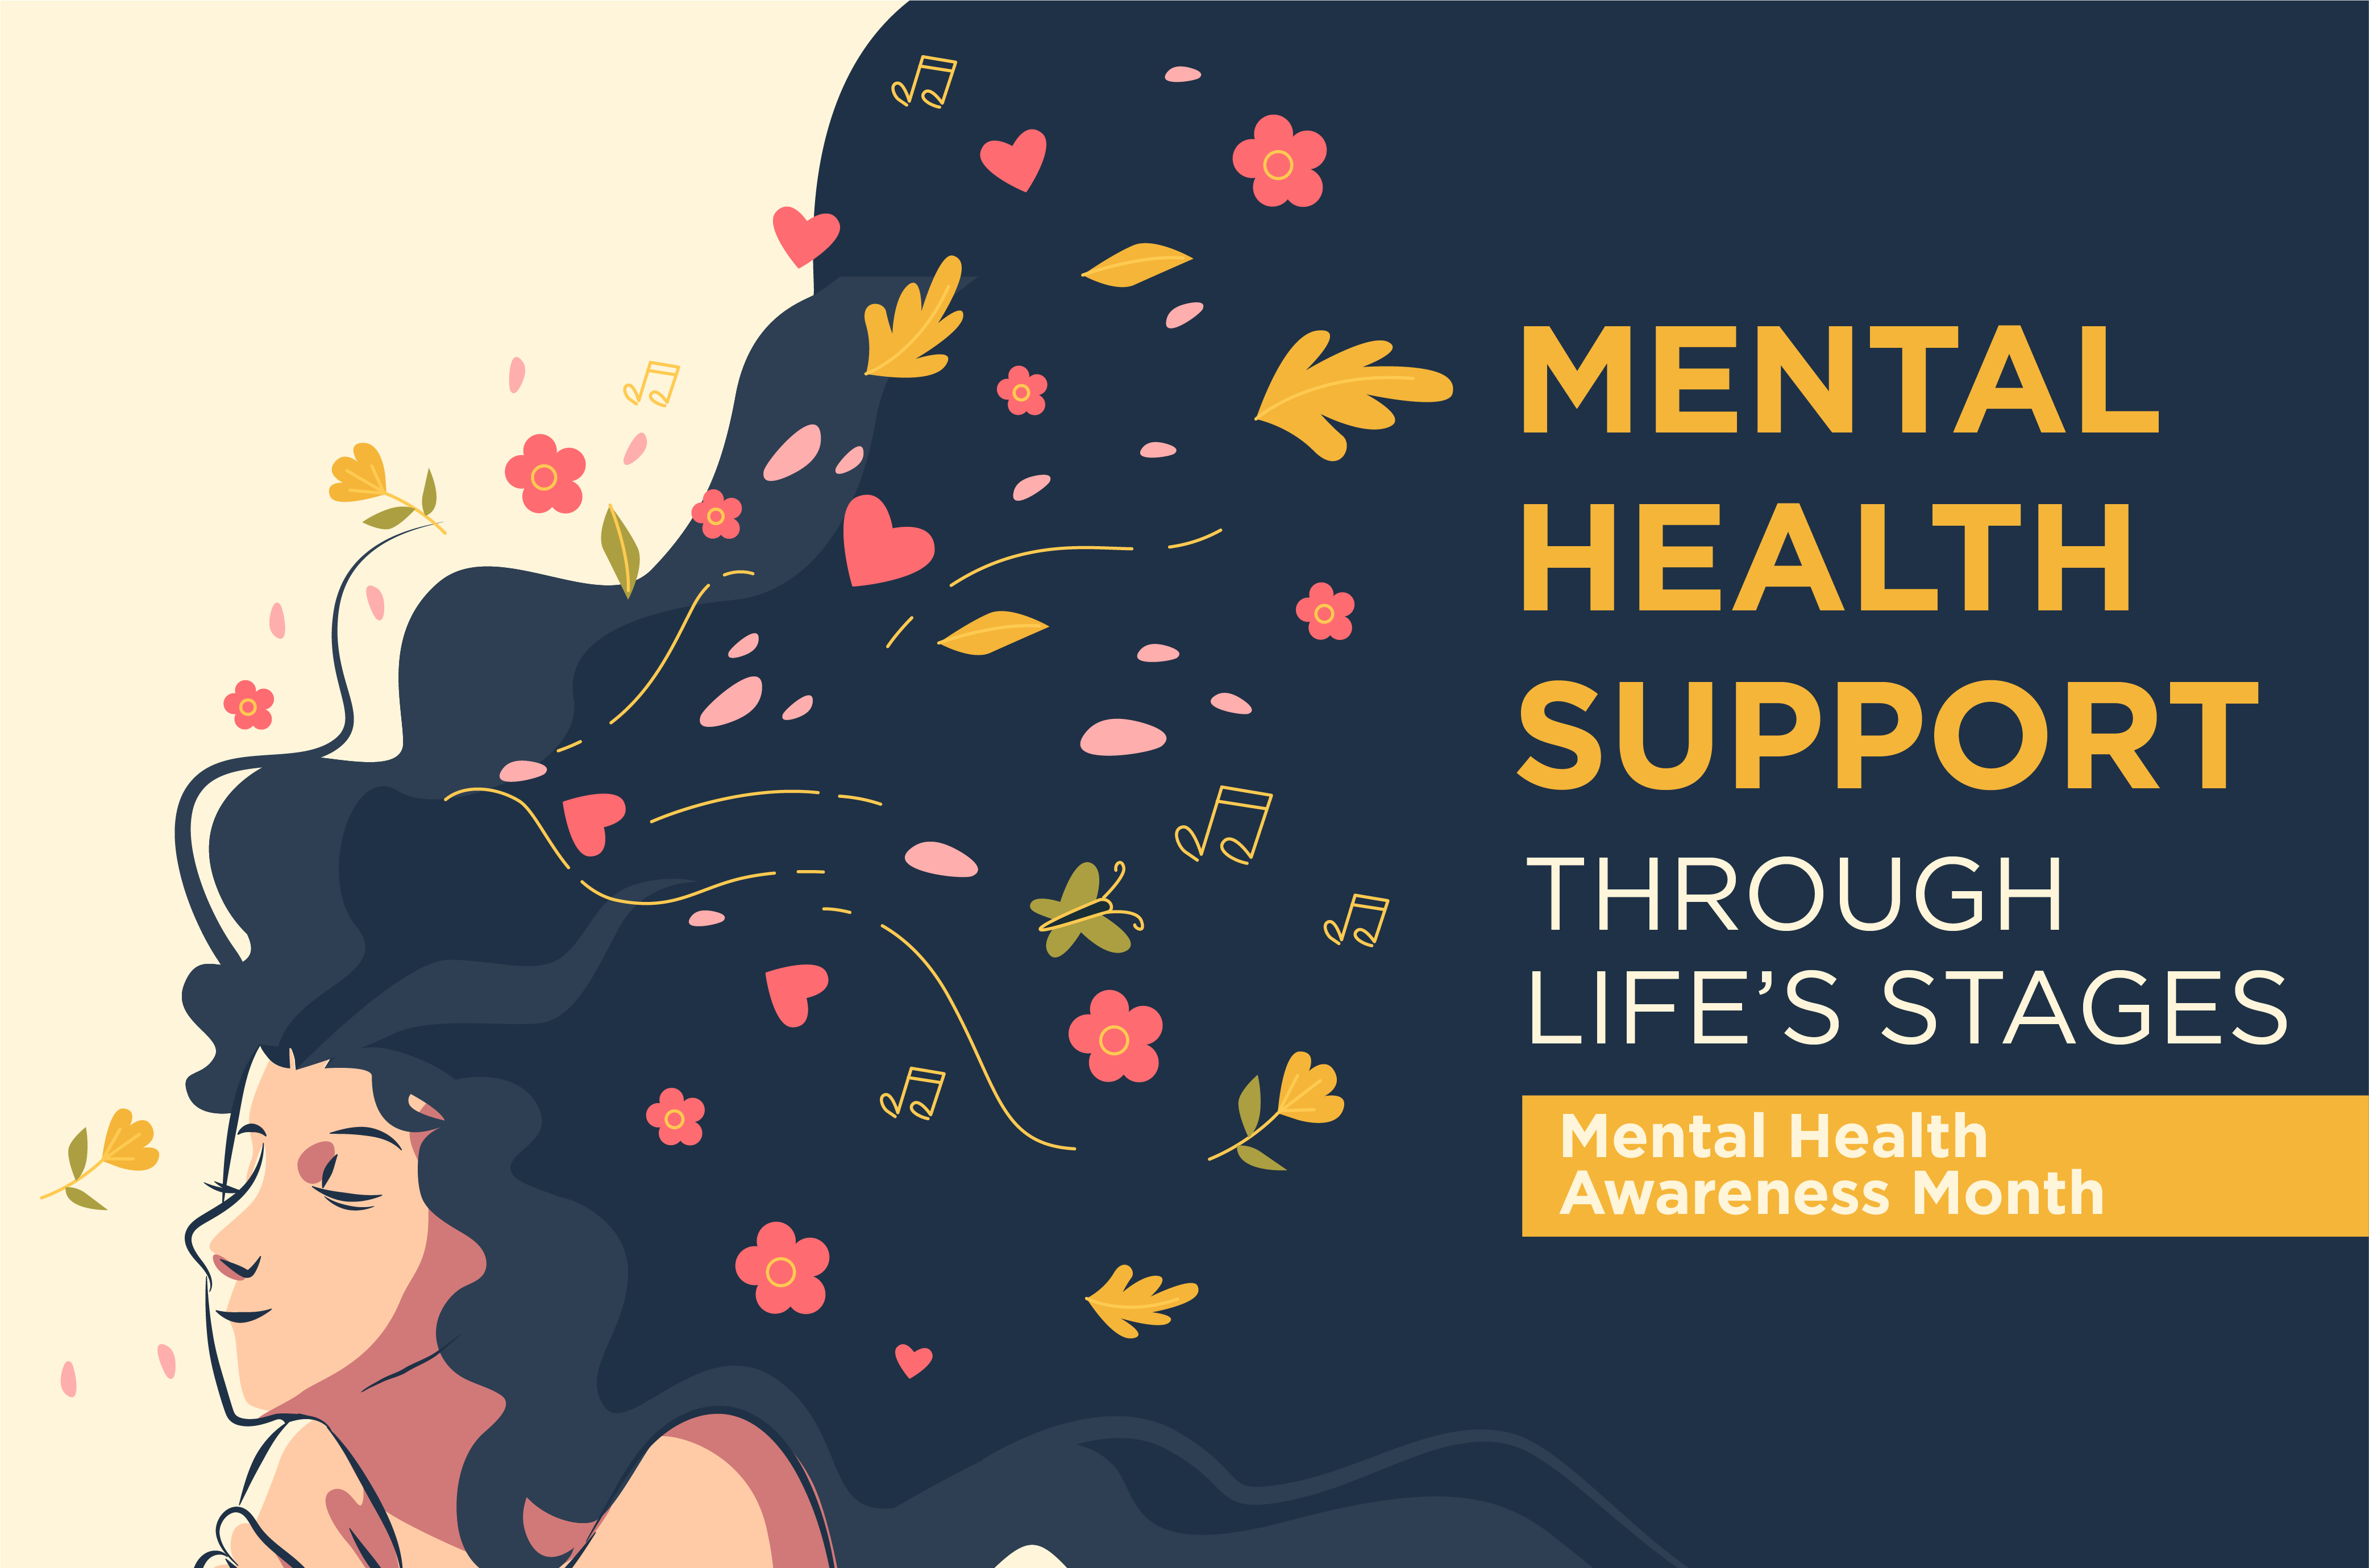 Mental Health Support Through Life’s Stages